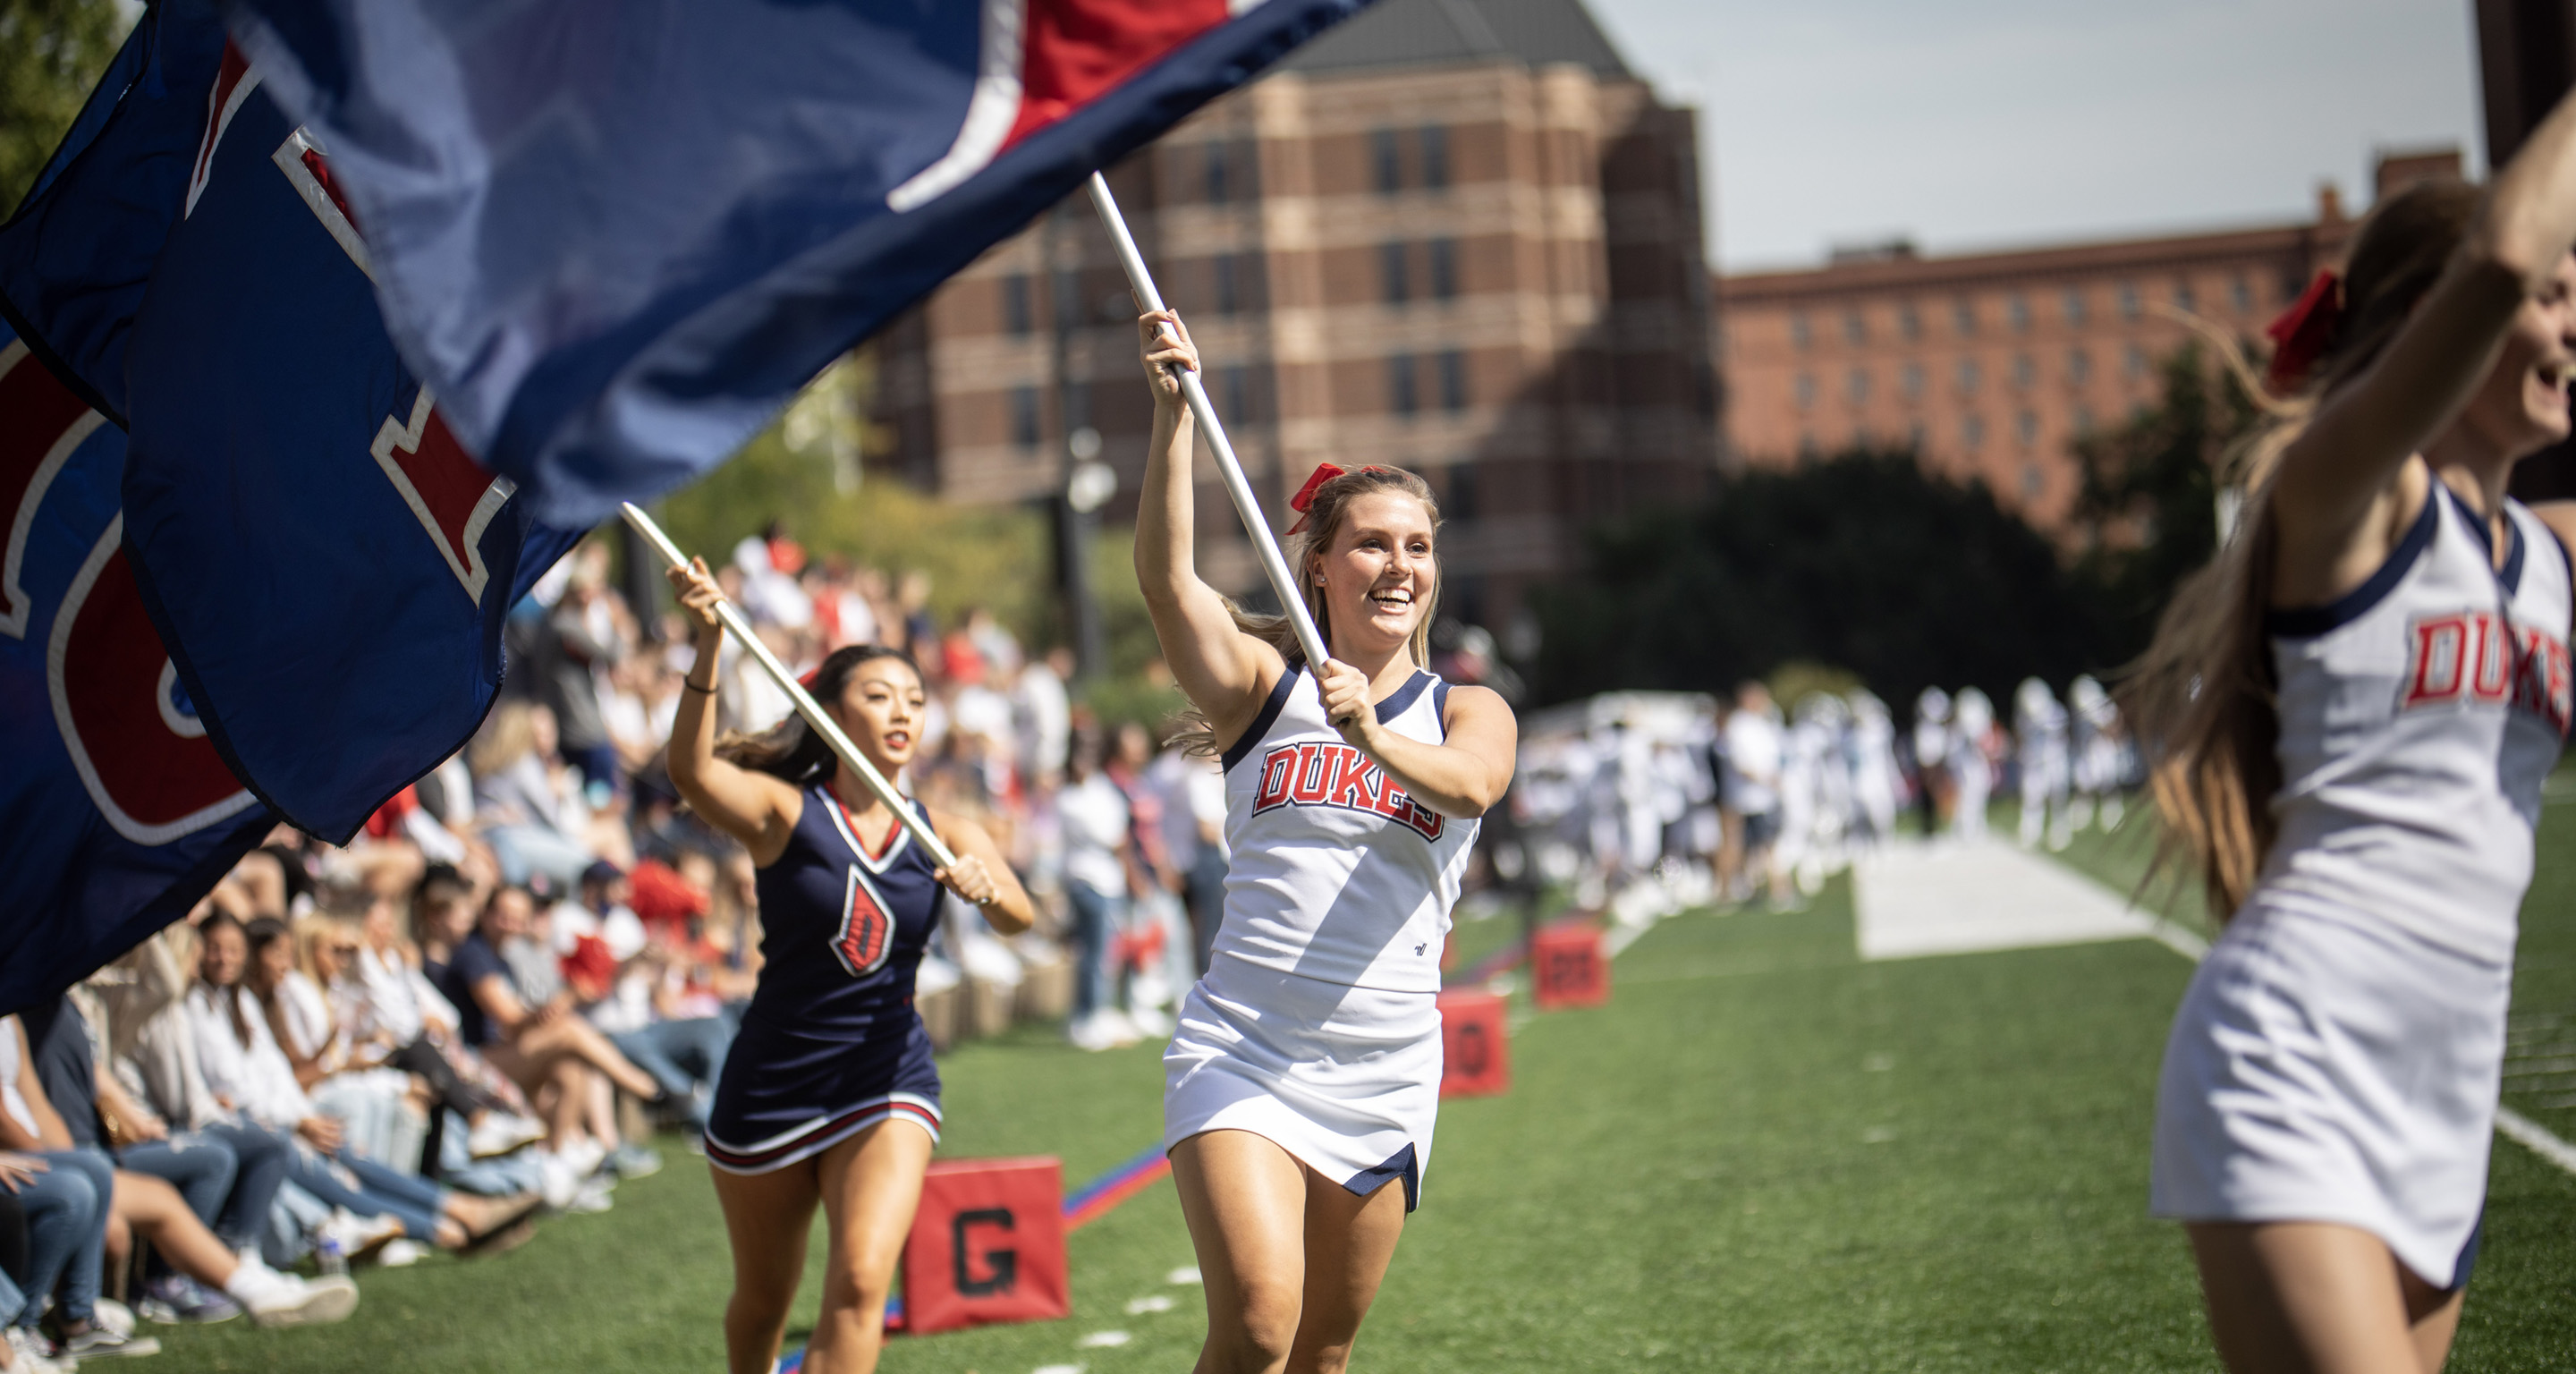 Duquesne Cheerleads running on Rooney Field with Duquesne banners.